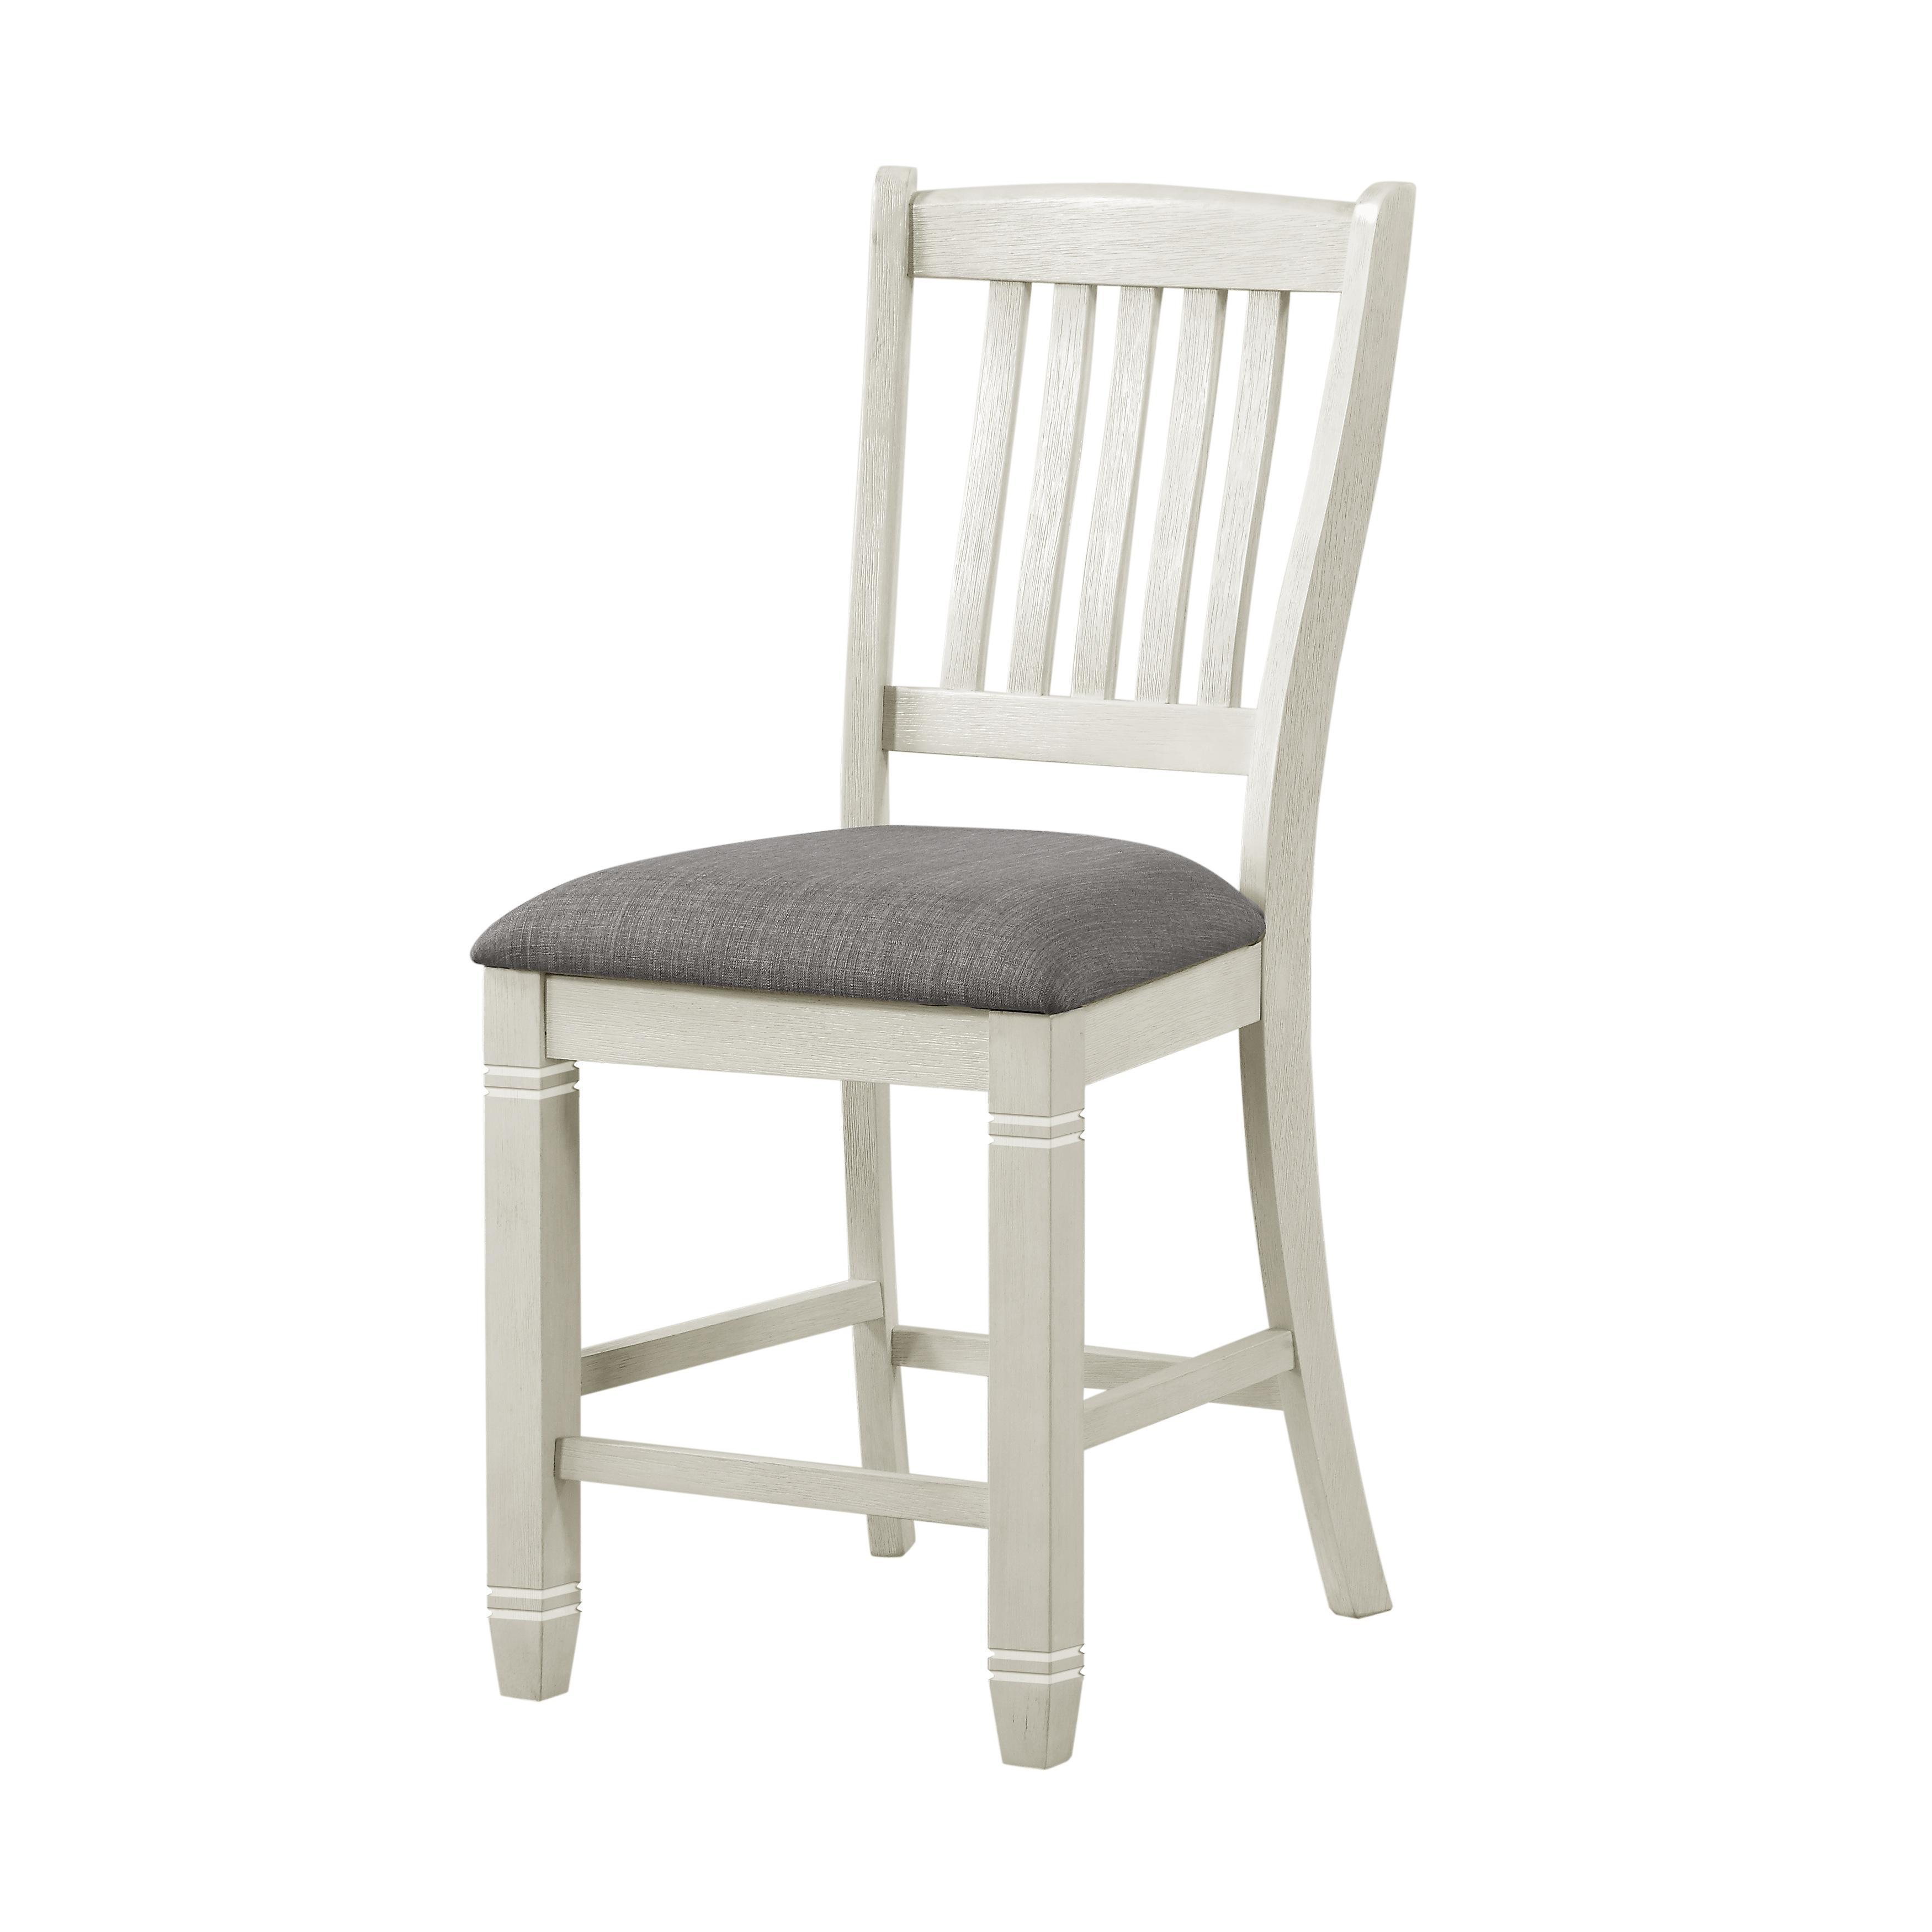 Casual Counter Height Chair 5627NW-24 Granby 5627NW-24 in Antique White Polyester